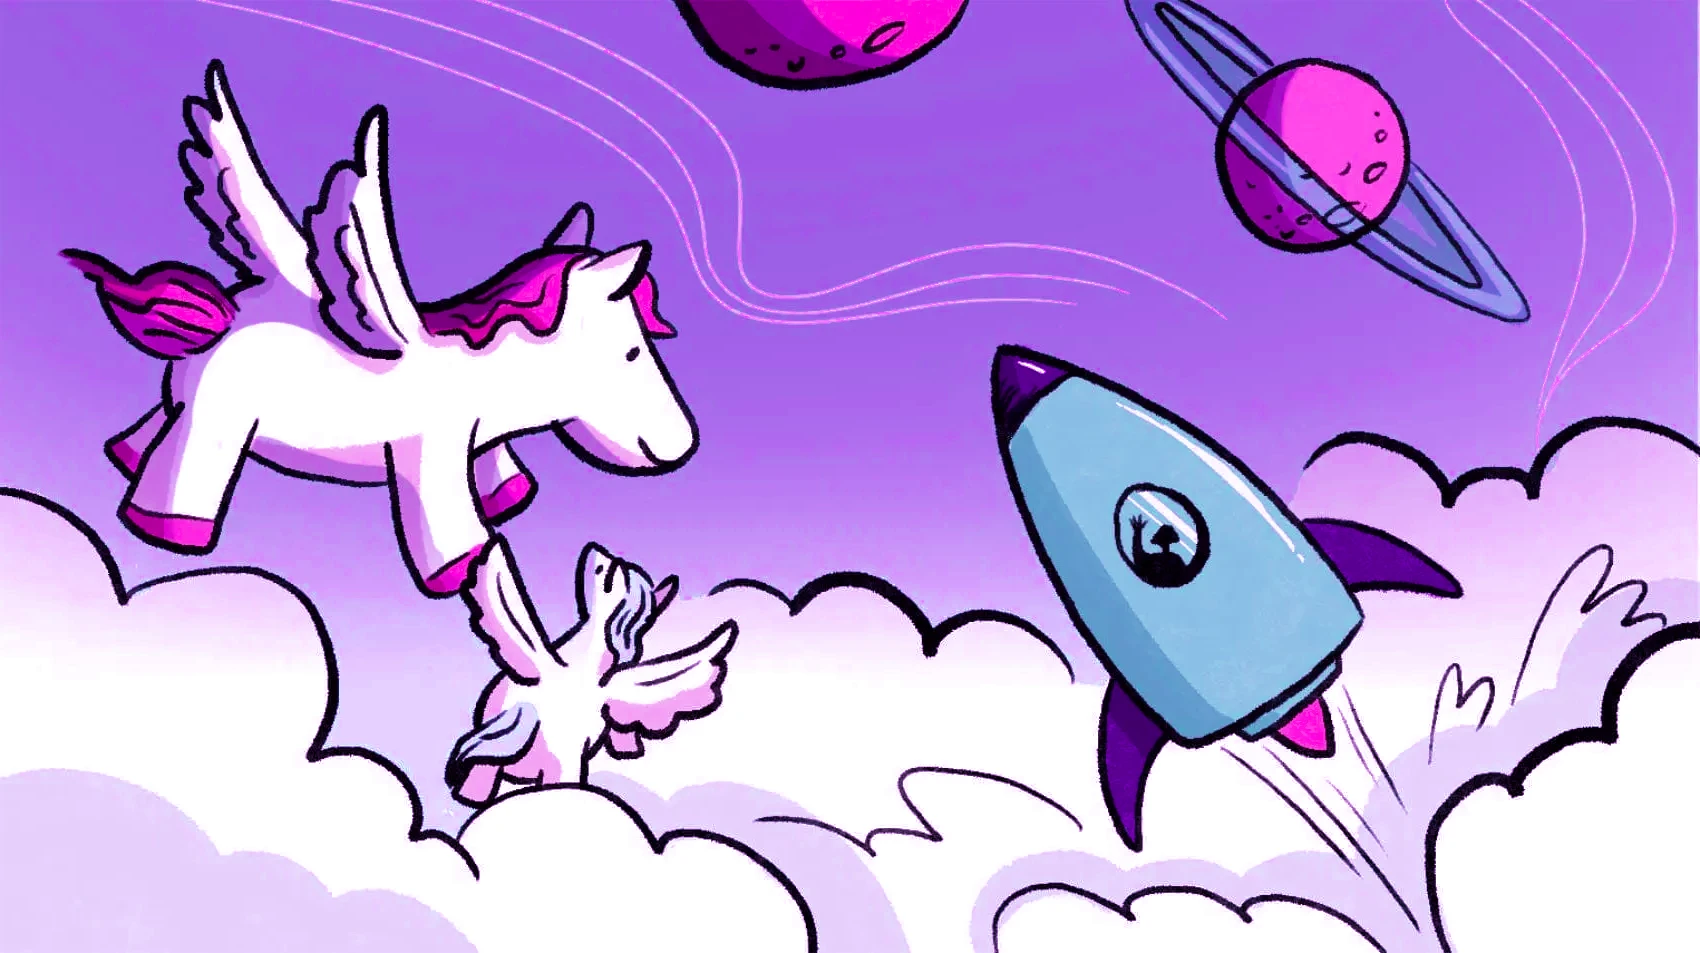 Unicorns flying through space with a rocket blasting through the scene